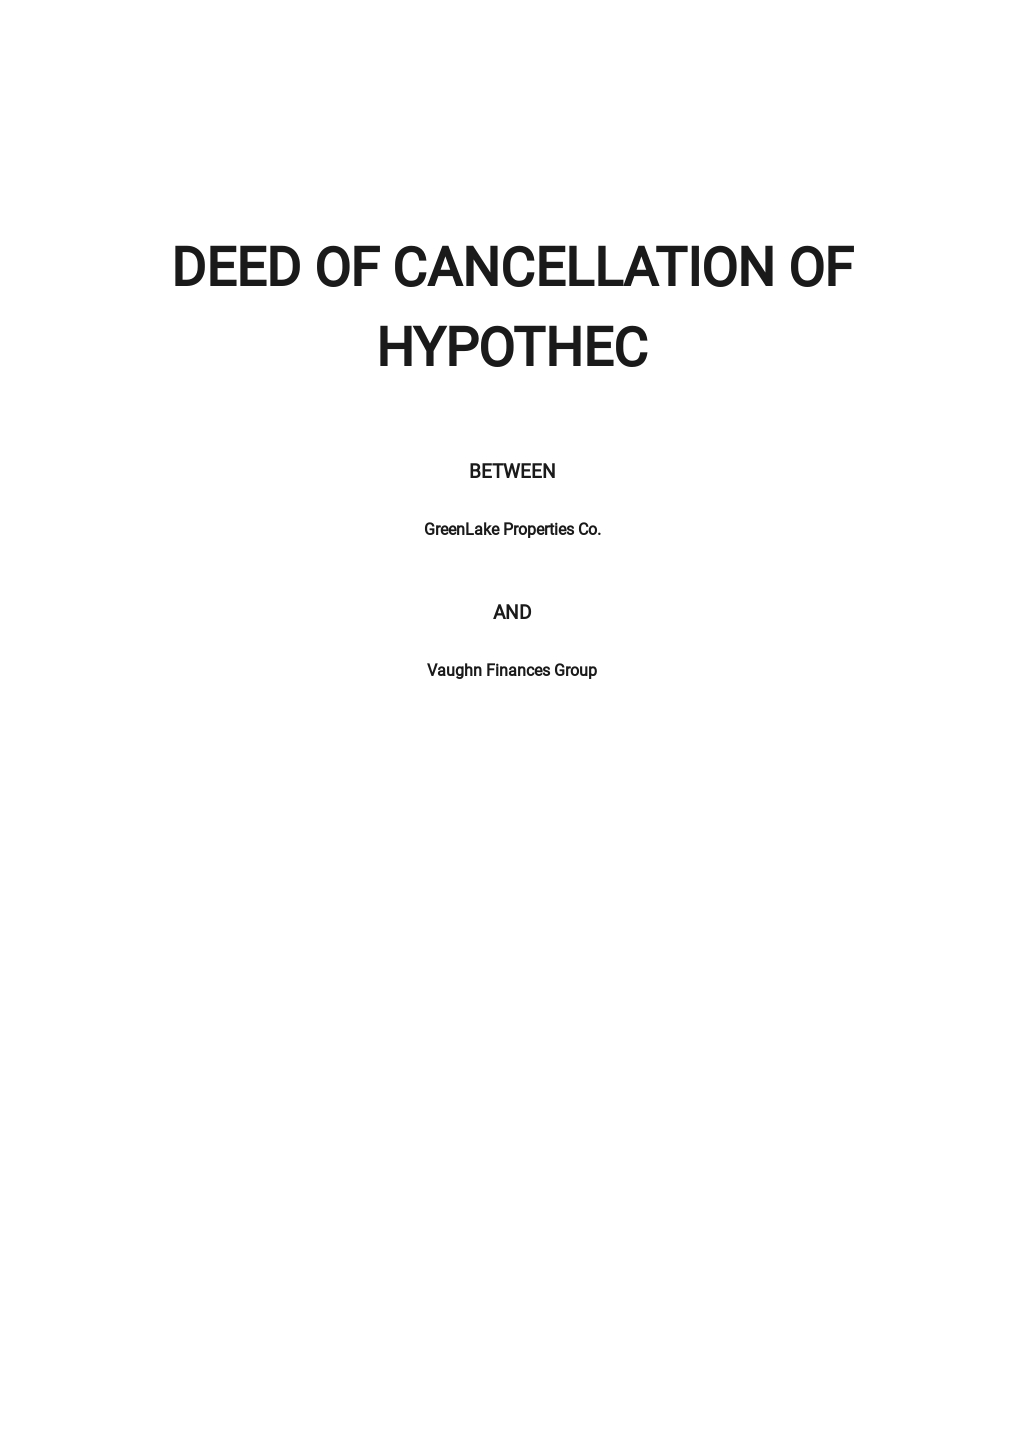 Deed of Cancellation of Hypothec Template.jpe